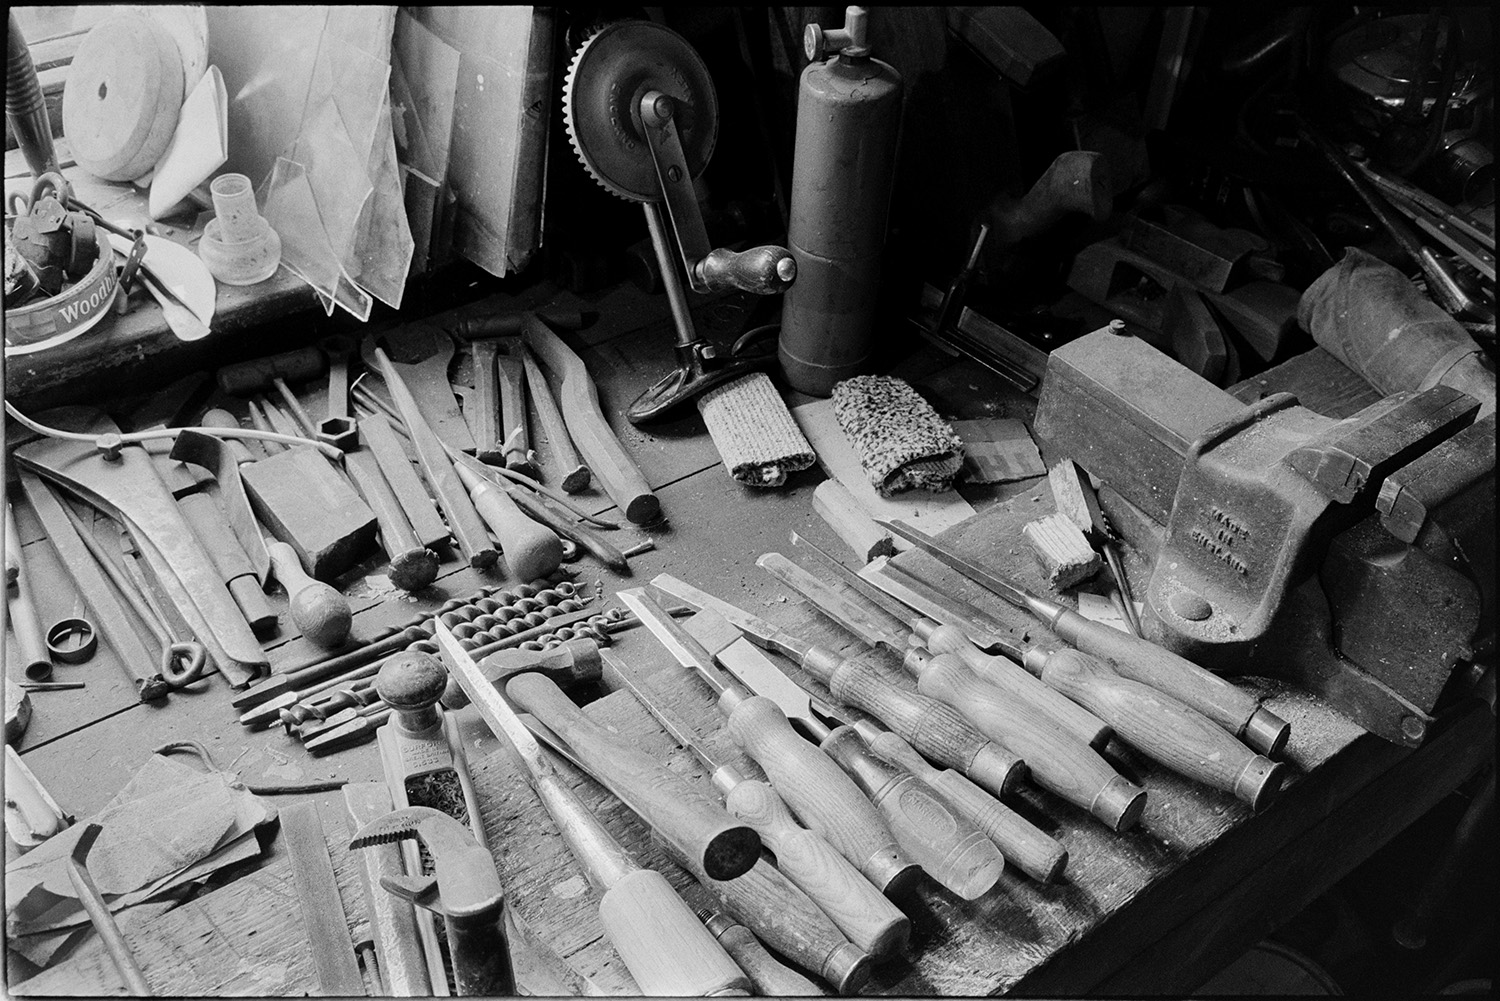 Tools, chisels etc on workshop bench. 
[Tools belonging to Bert Herd, including chisels, a hand drill and a vice on a workshop bench at Arscotts, Dolton.]